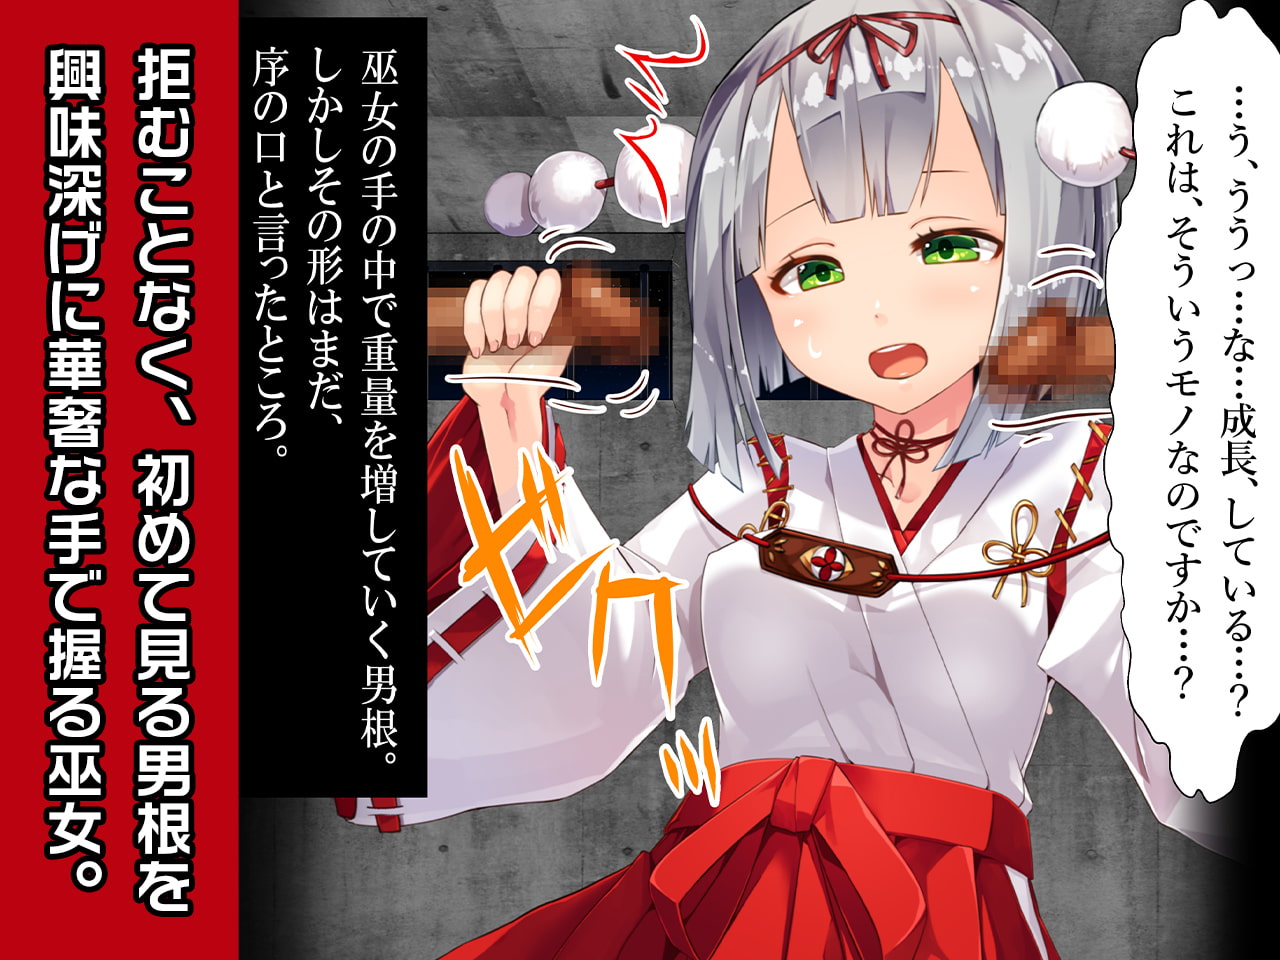 Ame no Himemiko ~Heroine Destruction Project~ Corrupt the Strong Willed Heroine!